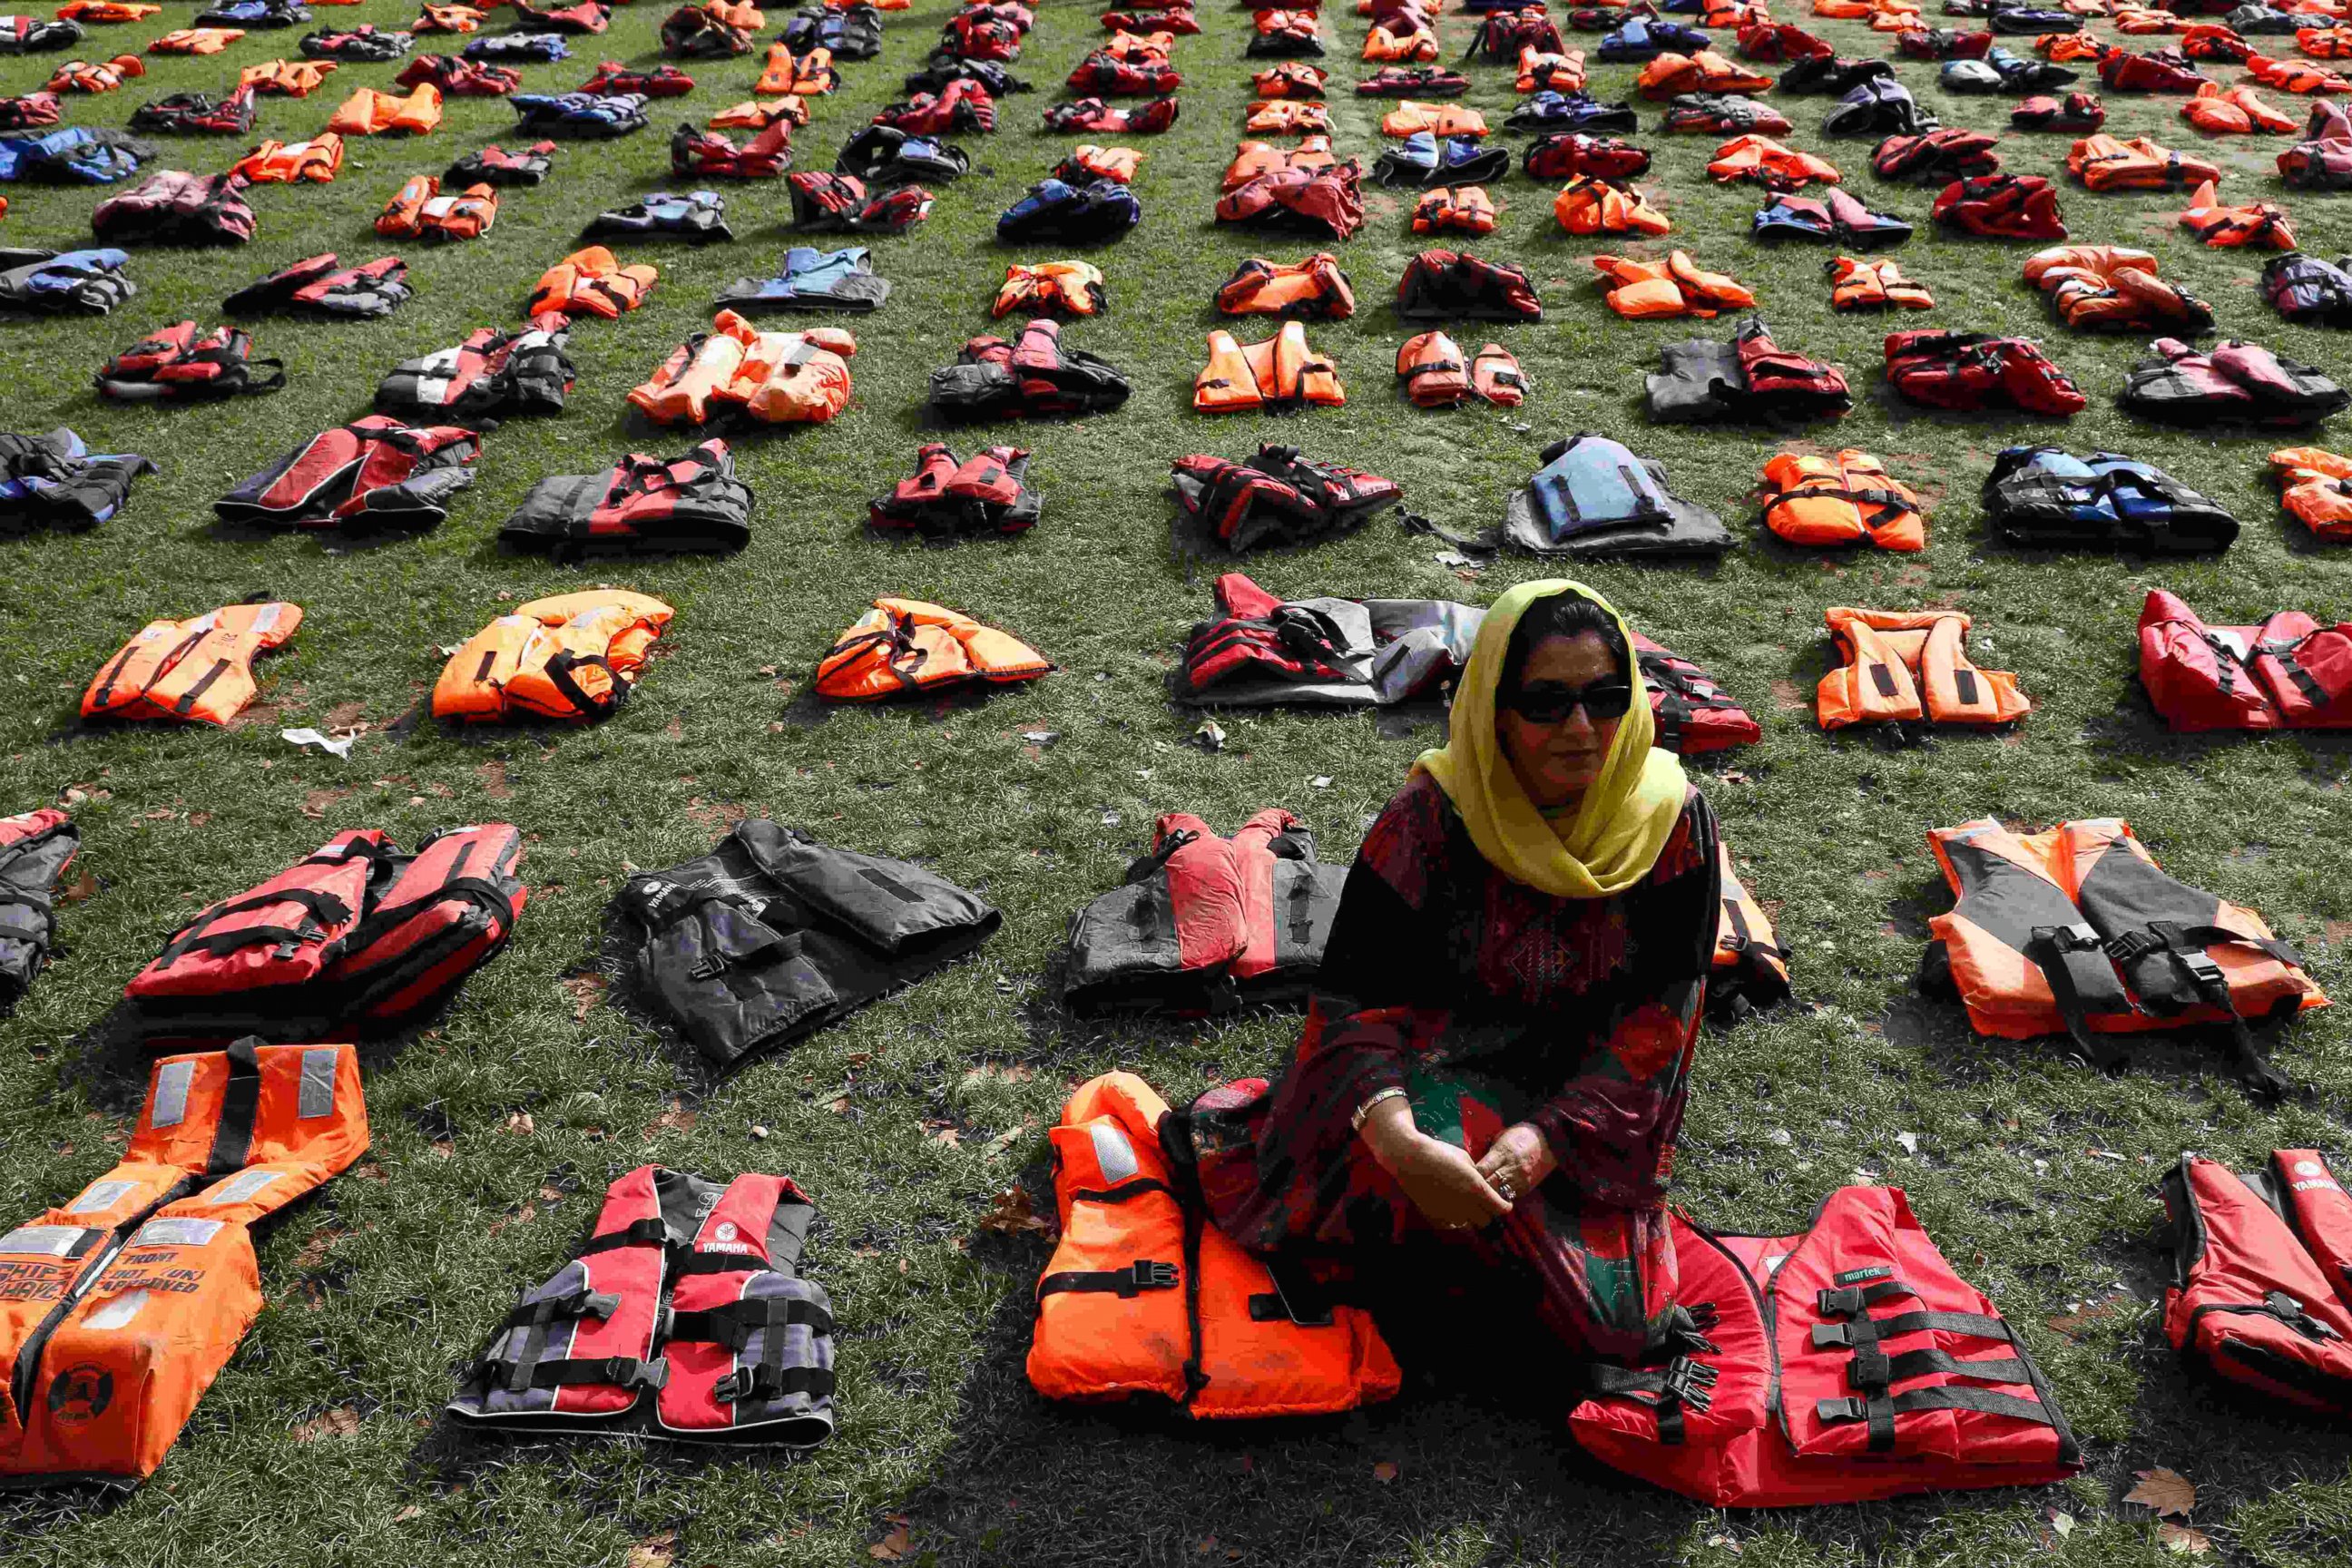 PHOTO: 2500 lifejackets worn by refugees during their crossing from Turkey to the Greek island of Chois are seen in Parliament Square in London, Sept. 19, 2016. 